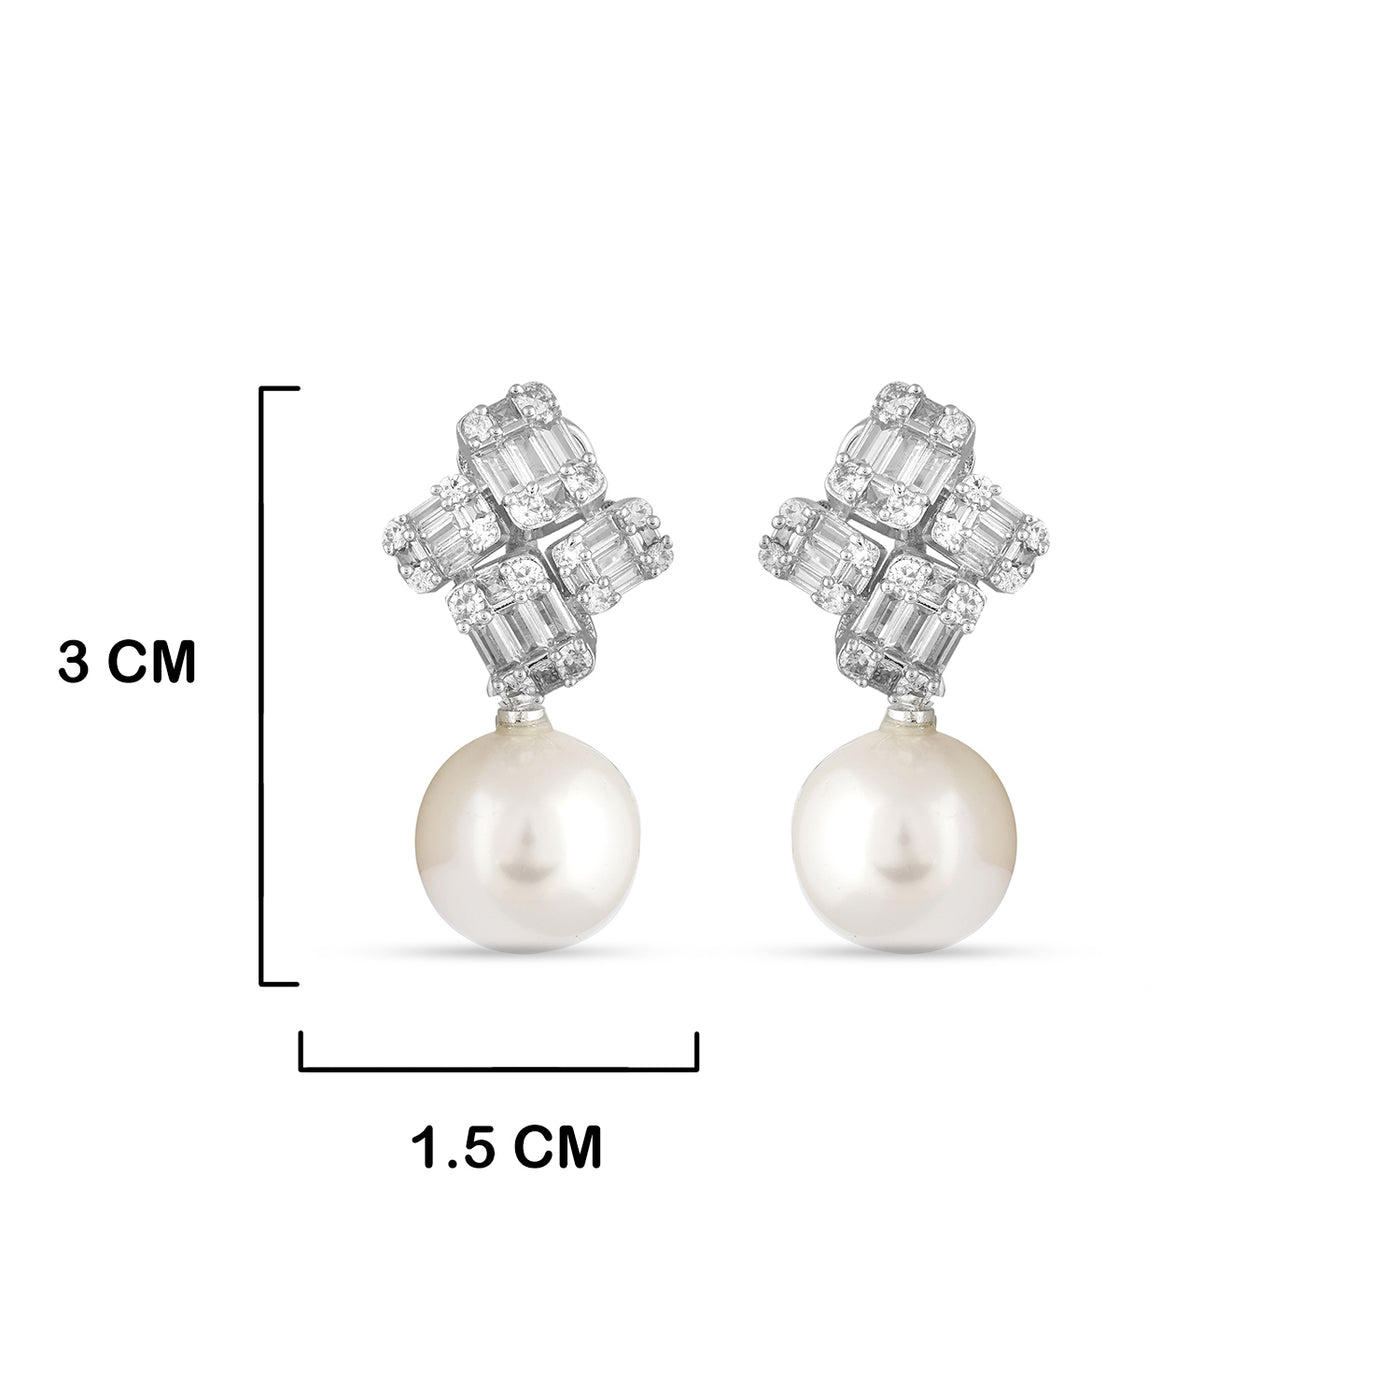 Cubic Zirconia Pearled Dangle Earrings with measurements in cm. 3cm by 1.5cm.